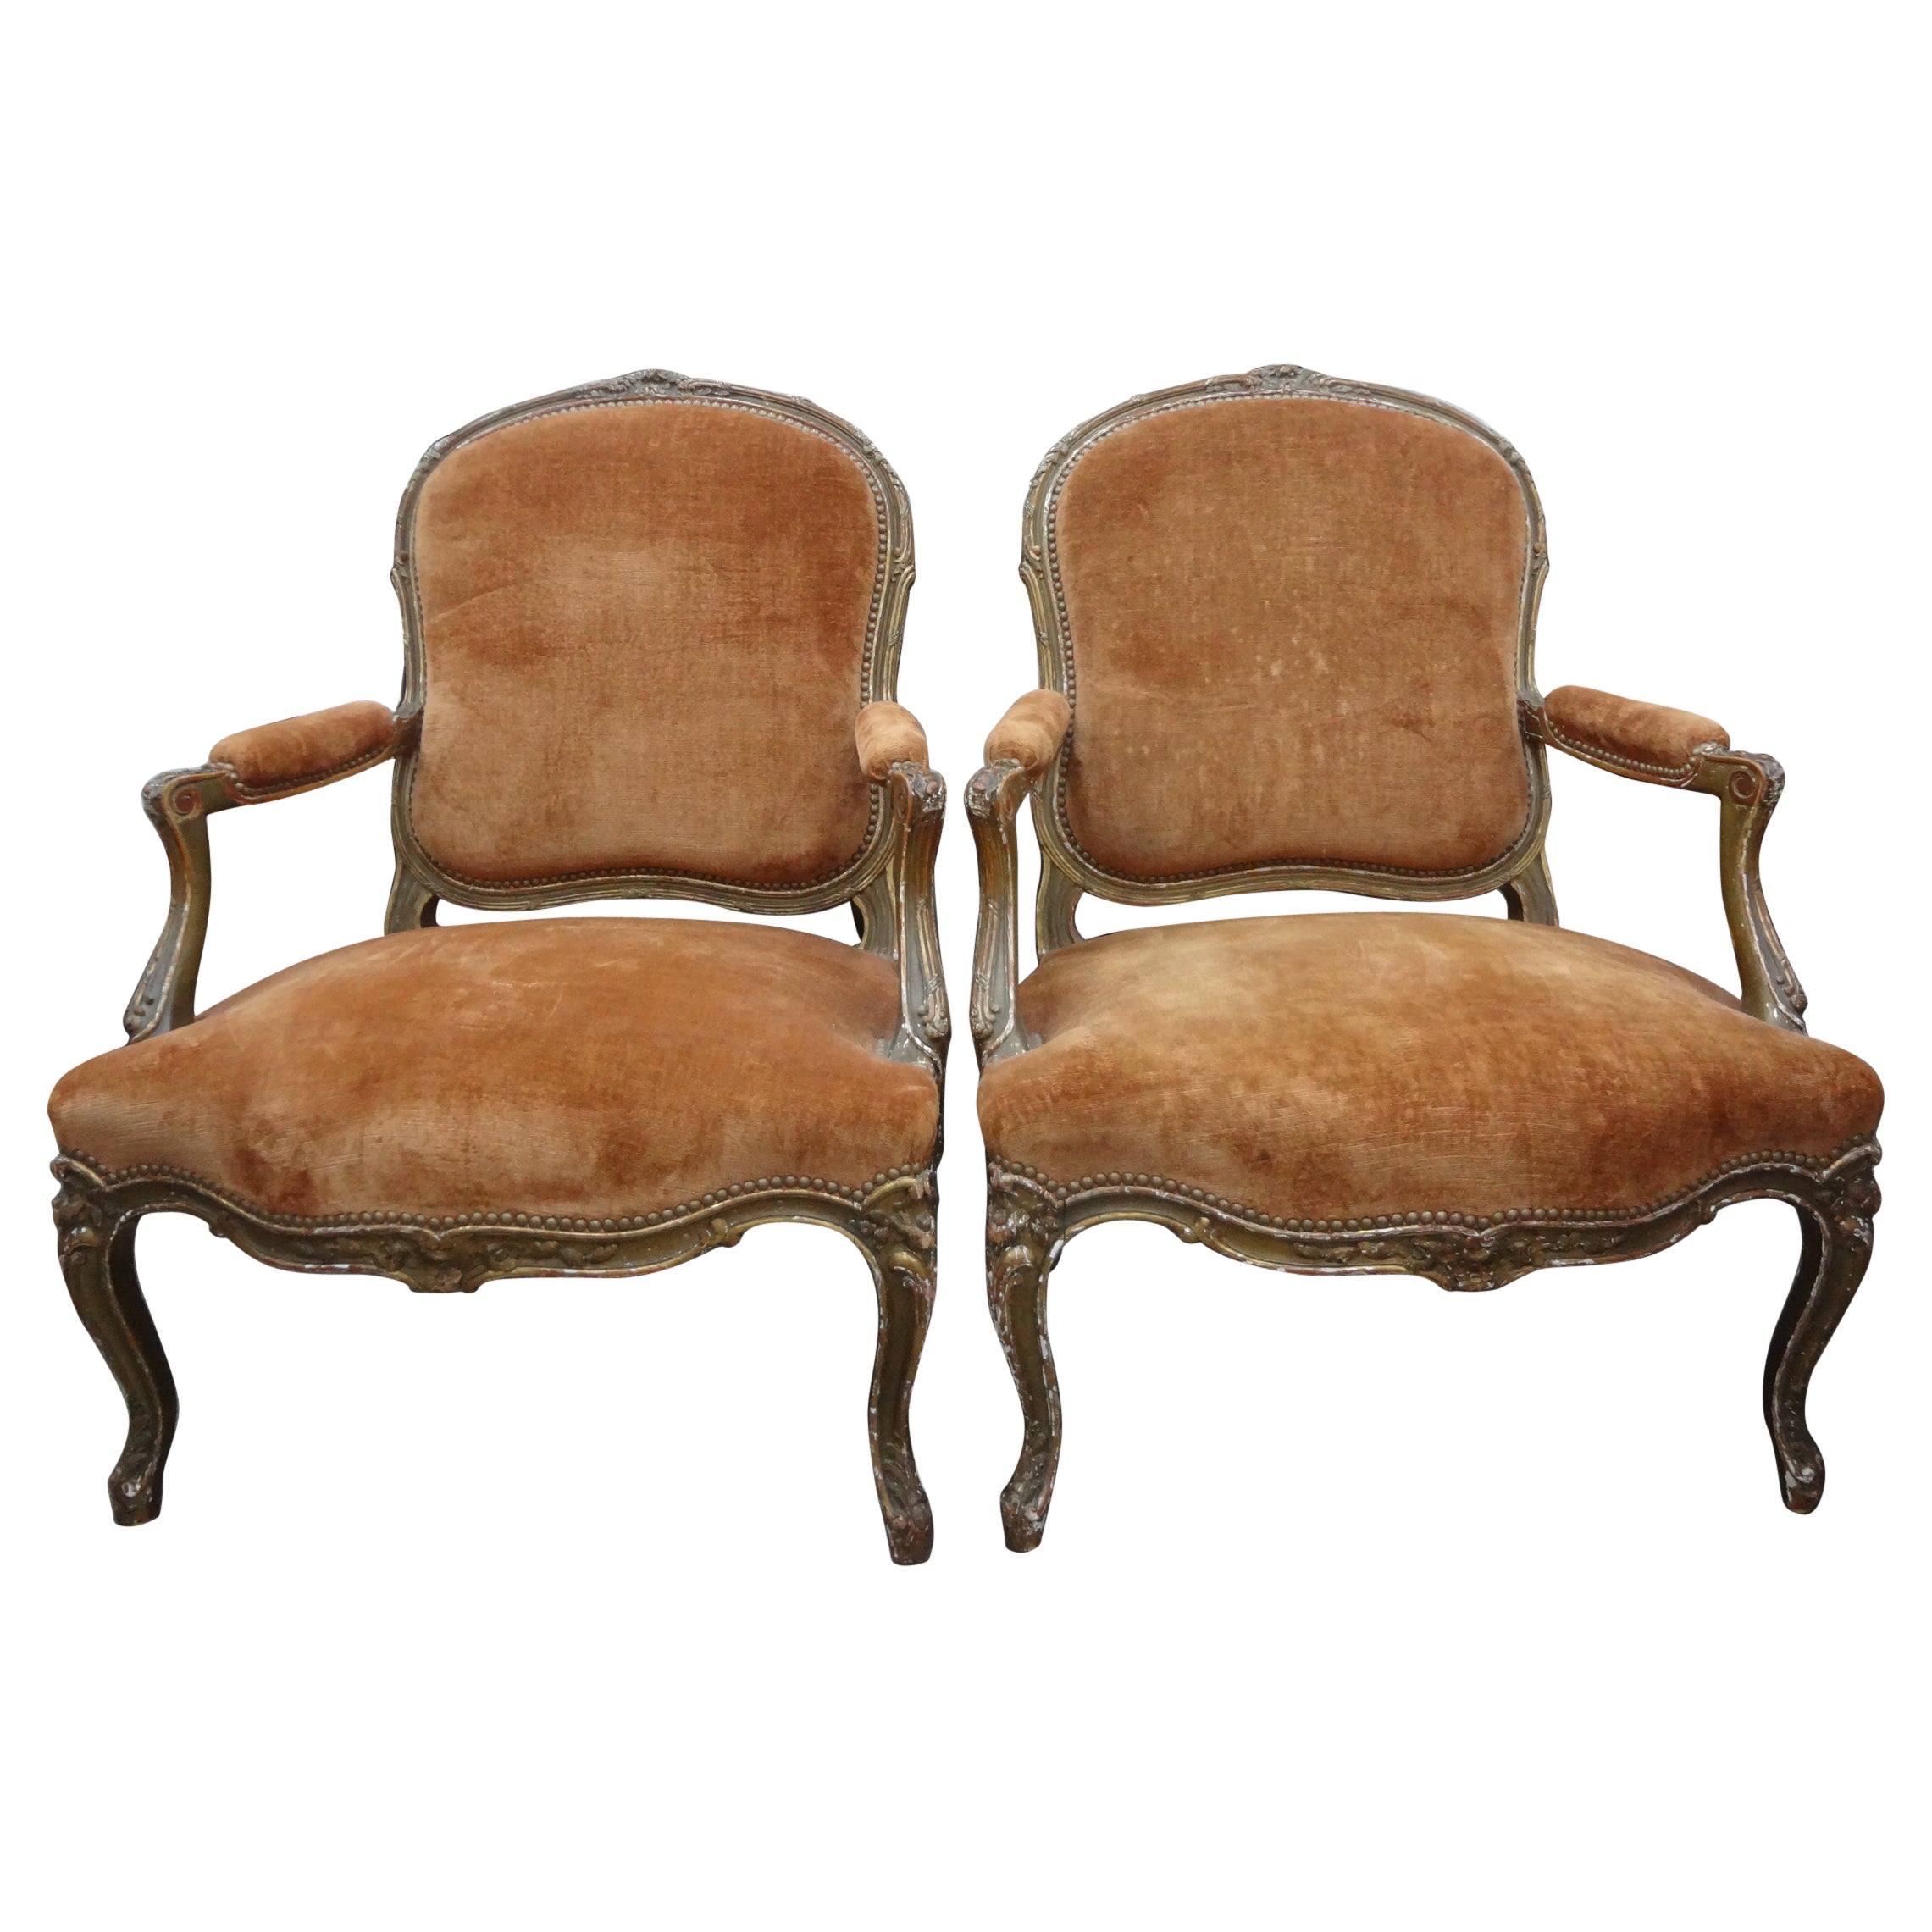 Pair of 19th Century French Louis XV Style Giltwood Chairs